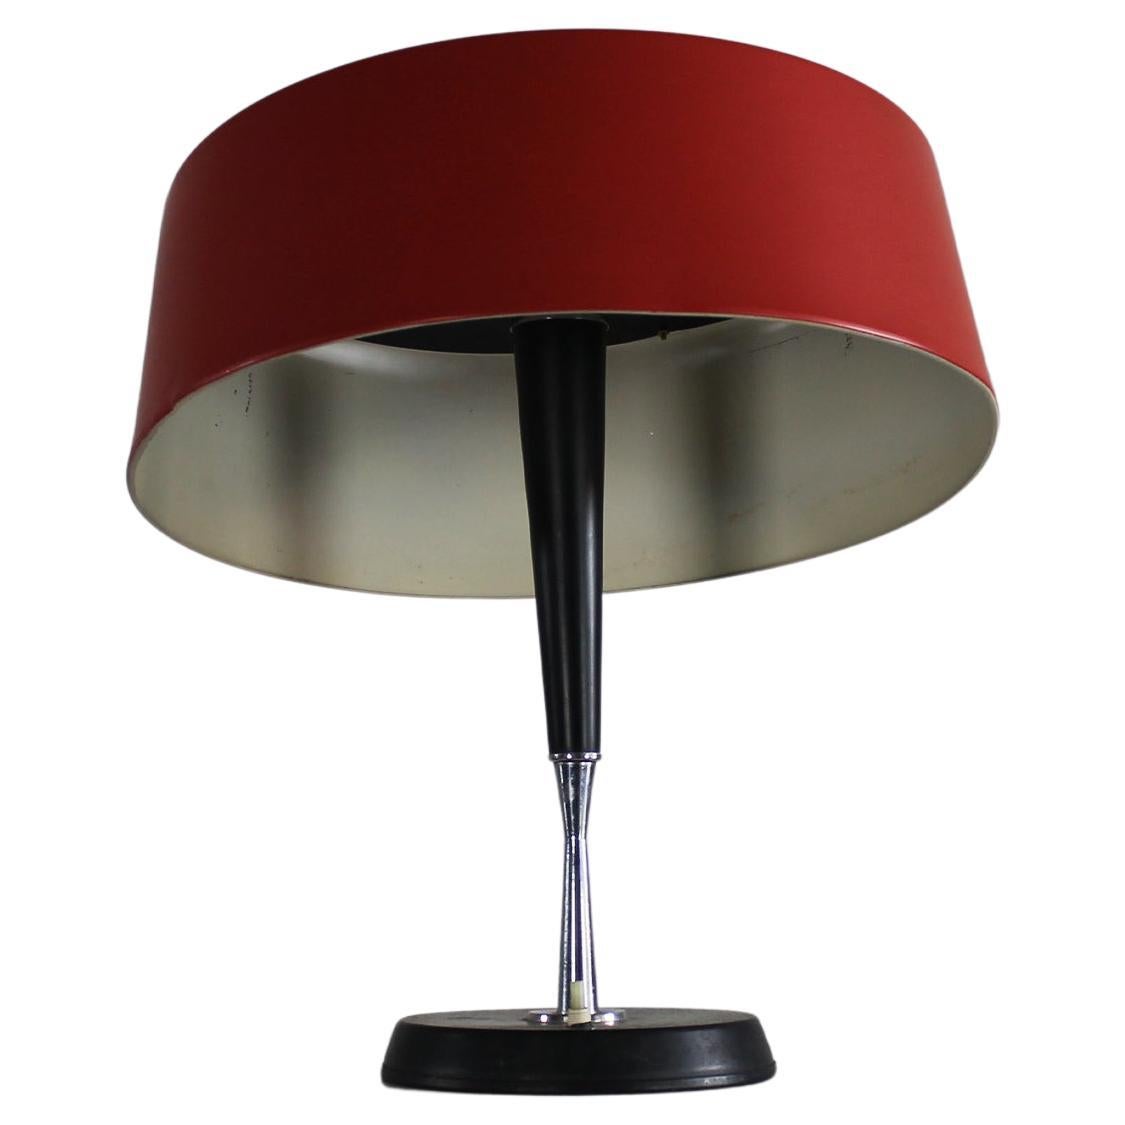 Vintage Table Lamp in Red Lacquered Aluminum by Oscar Torlasco 1950s Italy For Sale